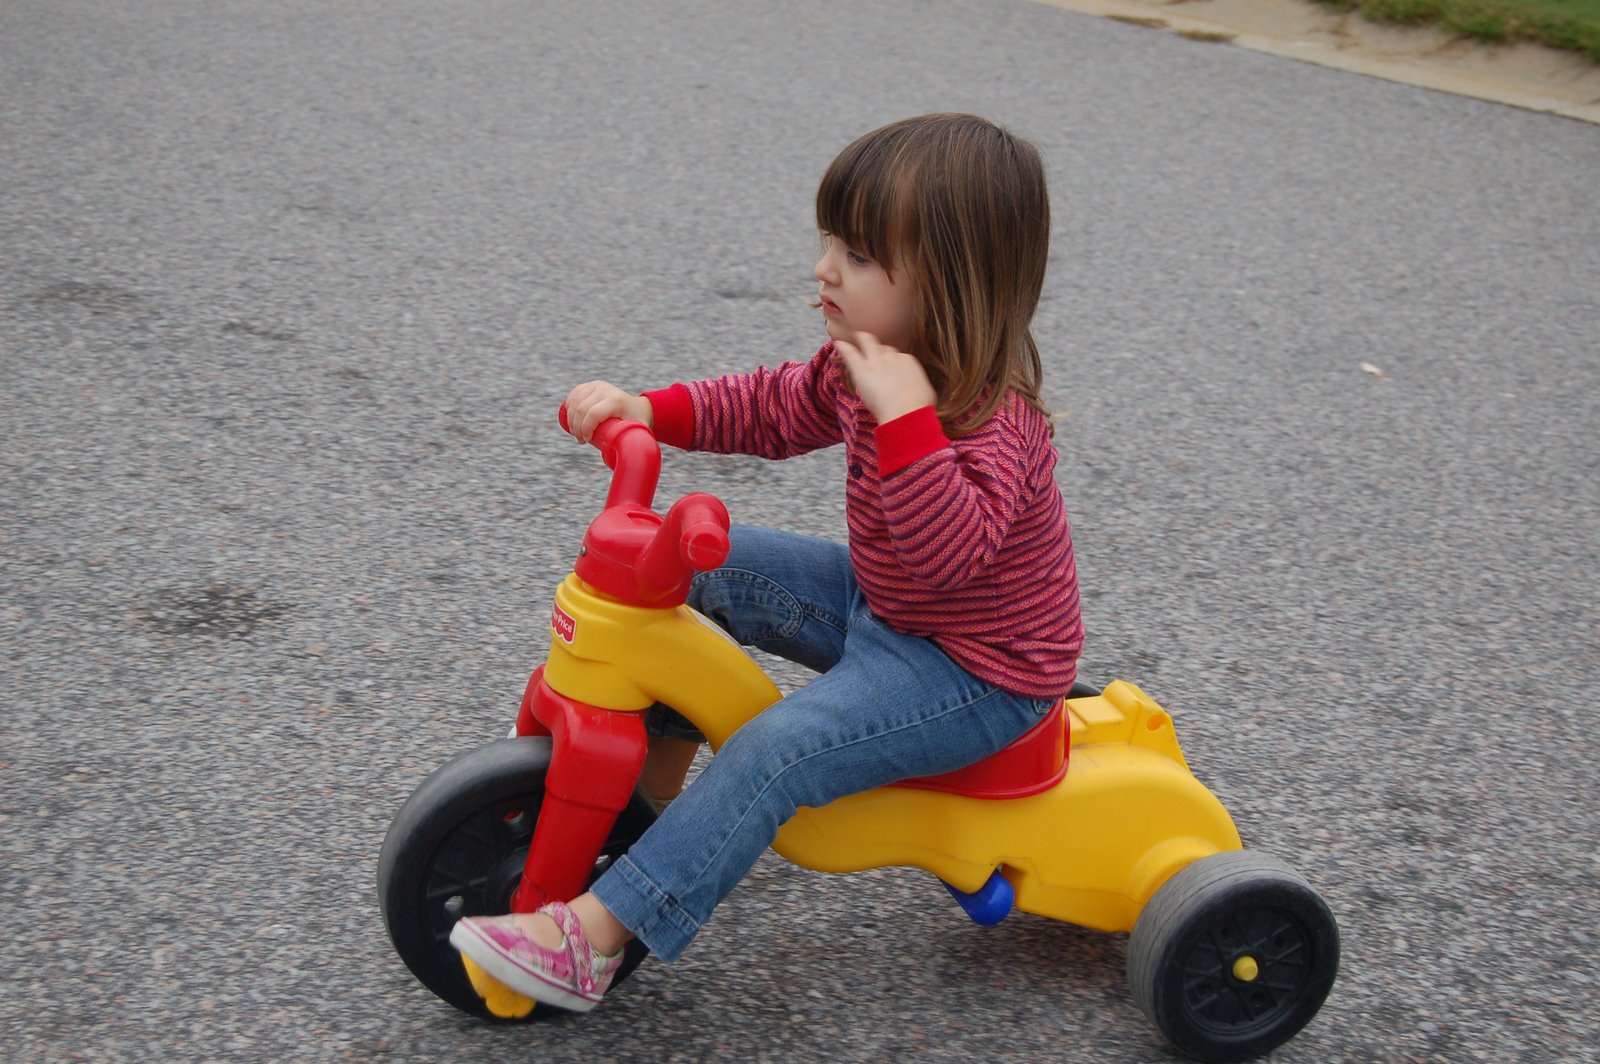 [emma+on+tricycle.jpg]